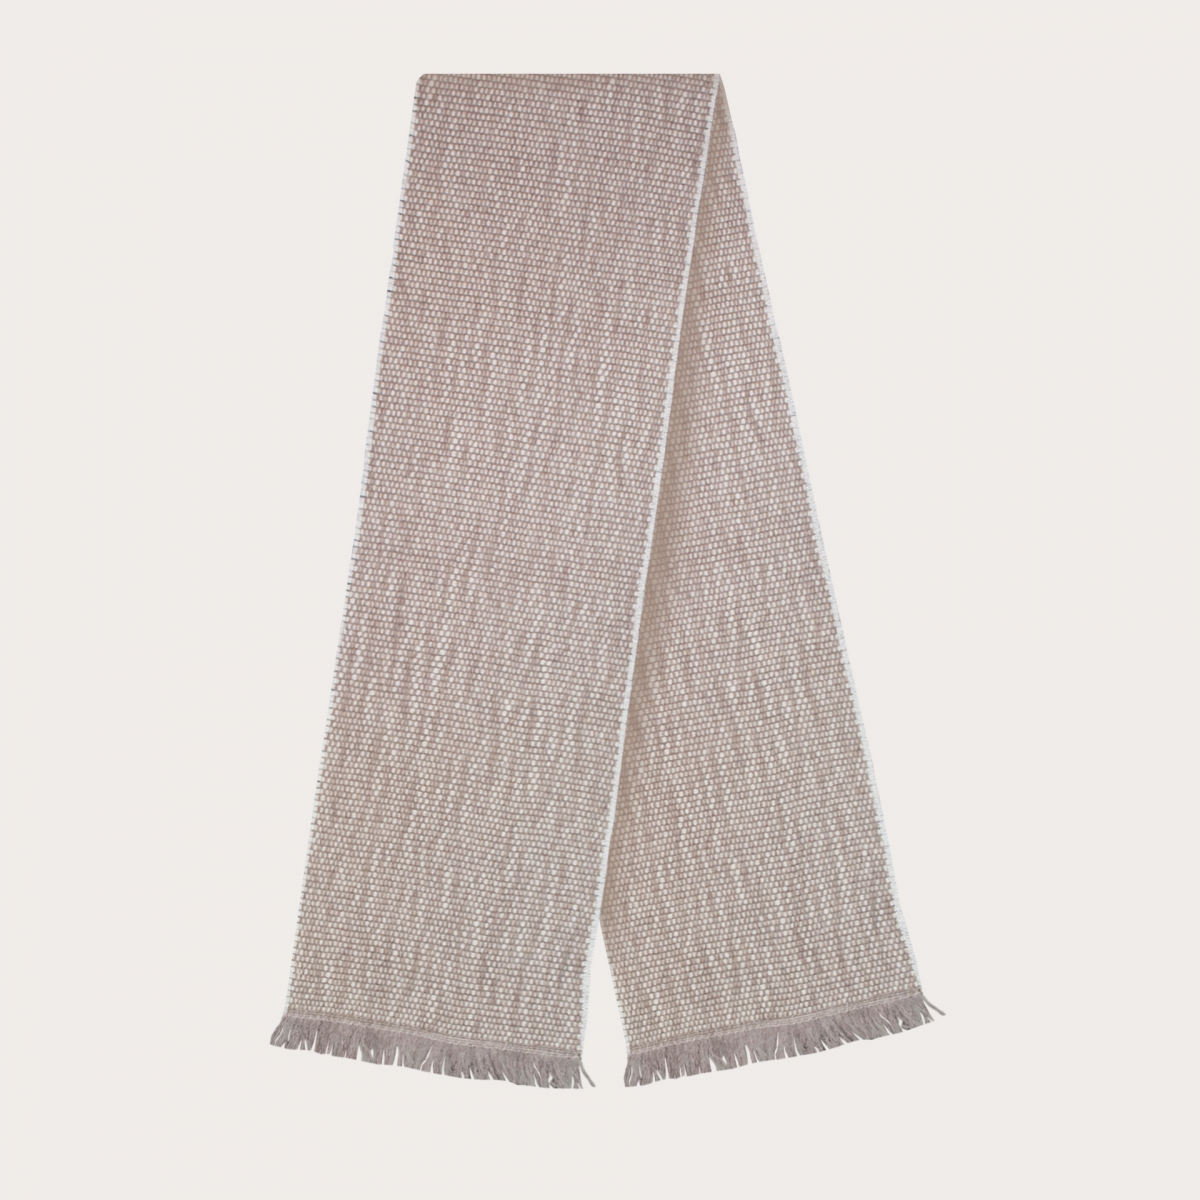 BRUCLE Cashmere scarf with woven pattern, beige and white